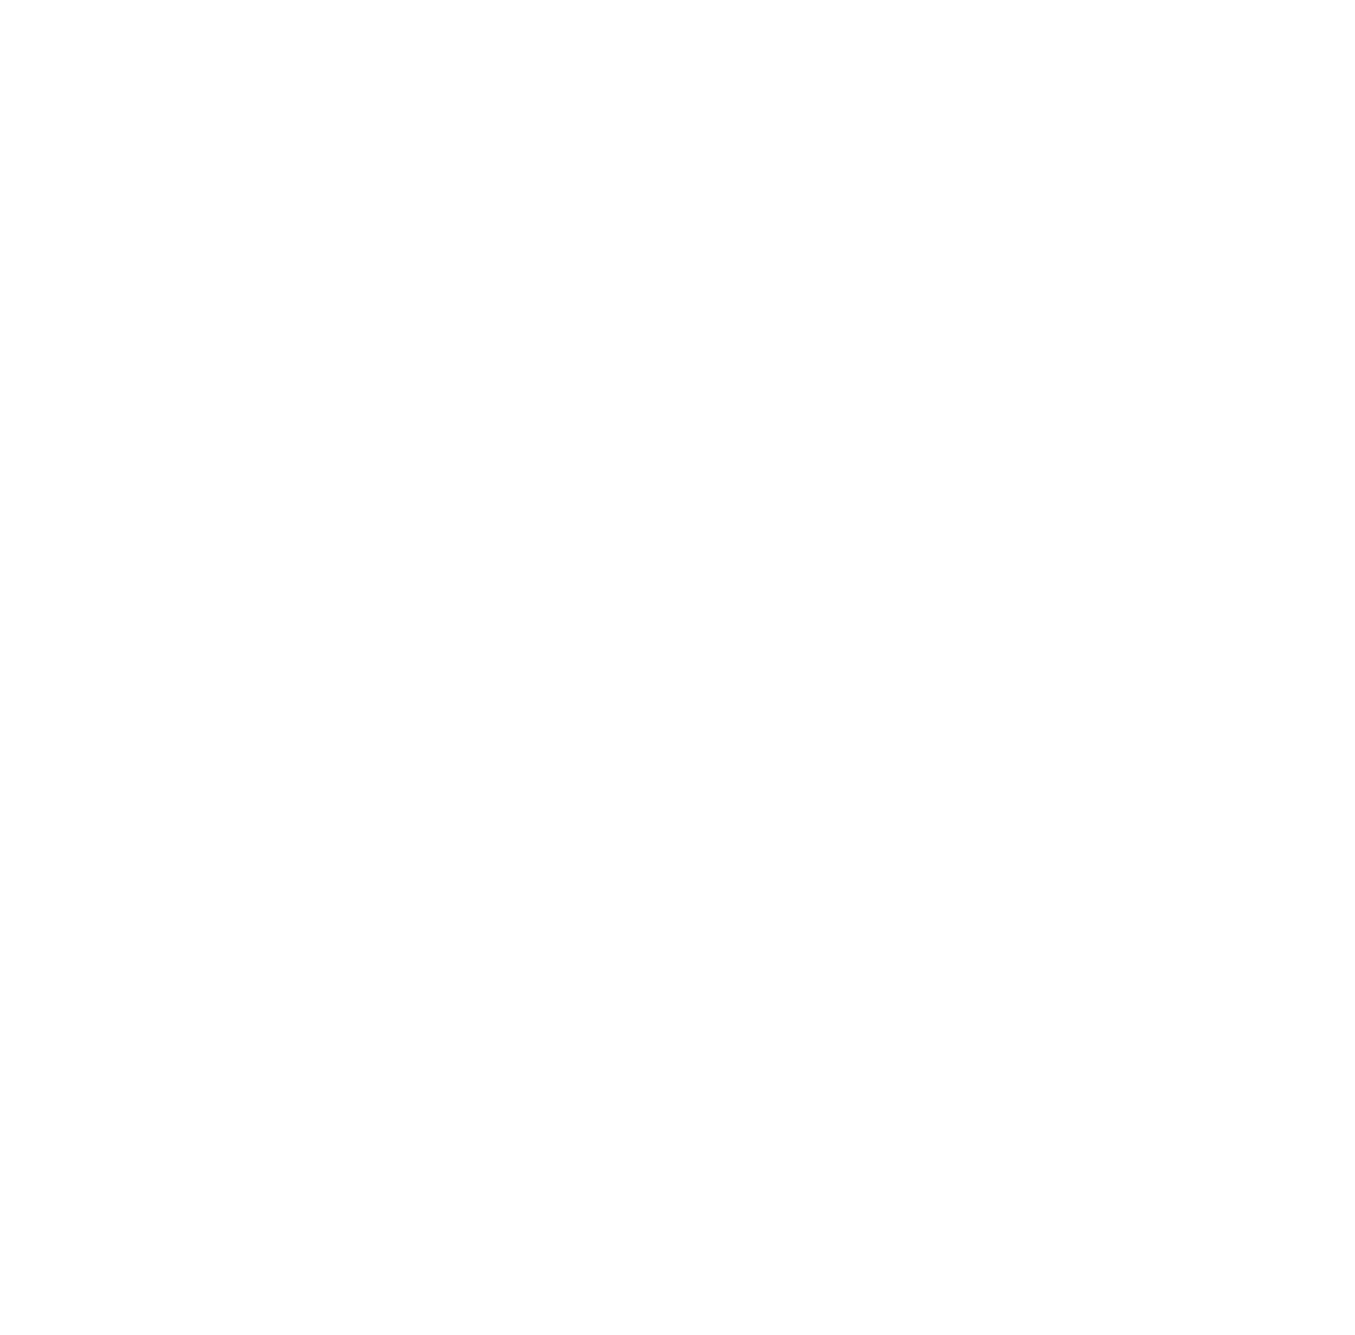 What Works in Education? is an initiative to collect and disseminate what we know about the effectiveness of educational interventions, in order to inform decision-making processes.